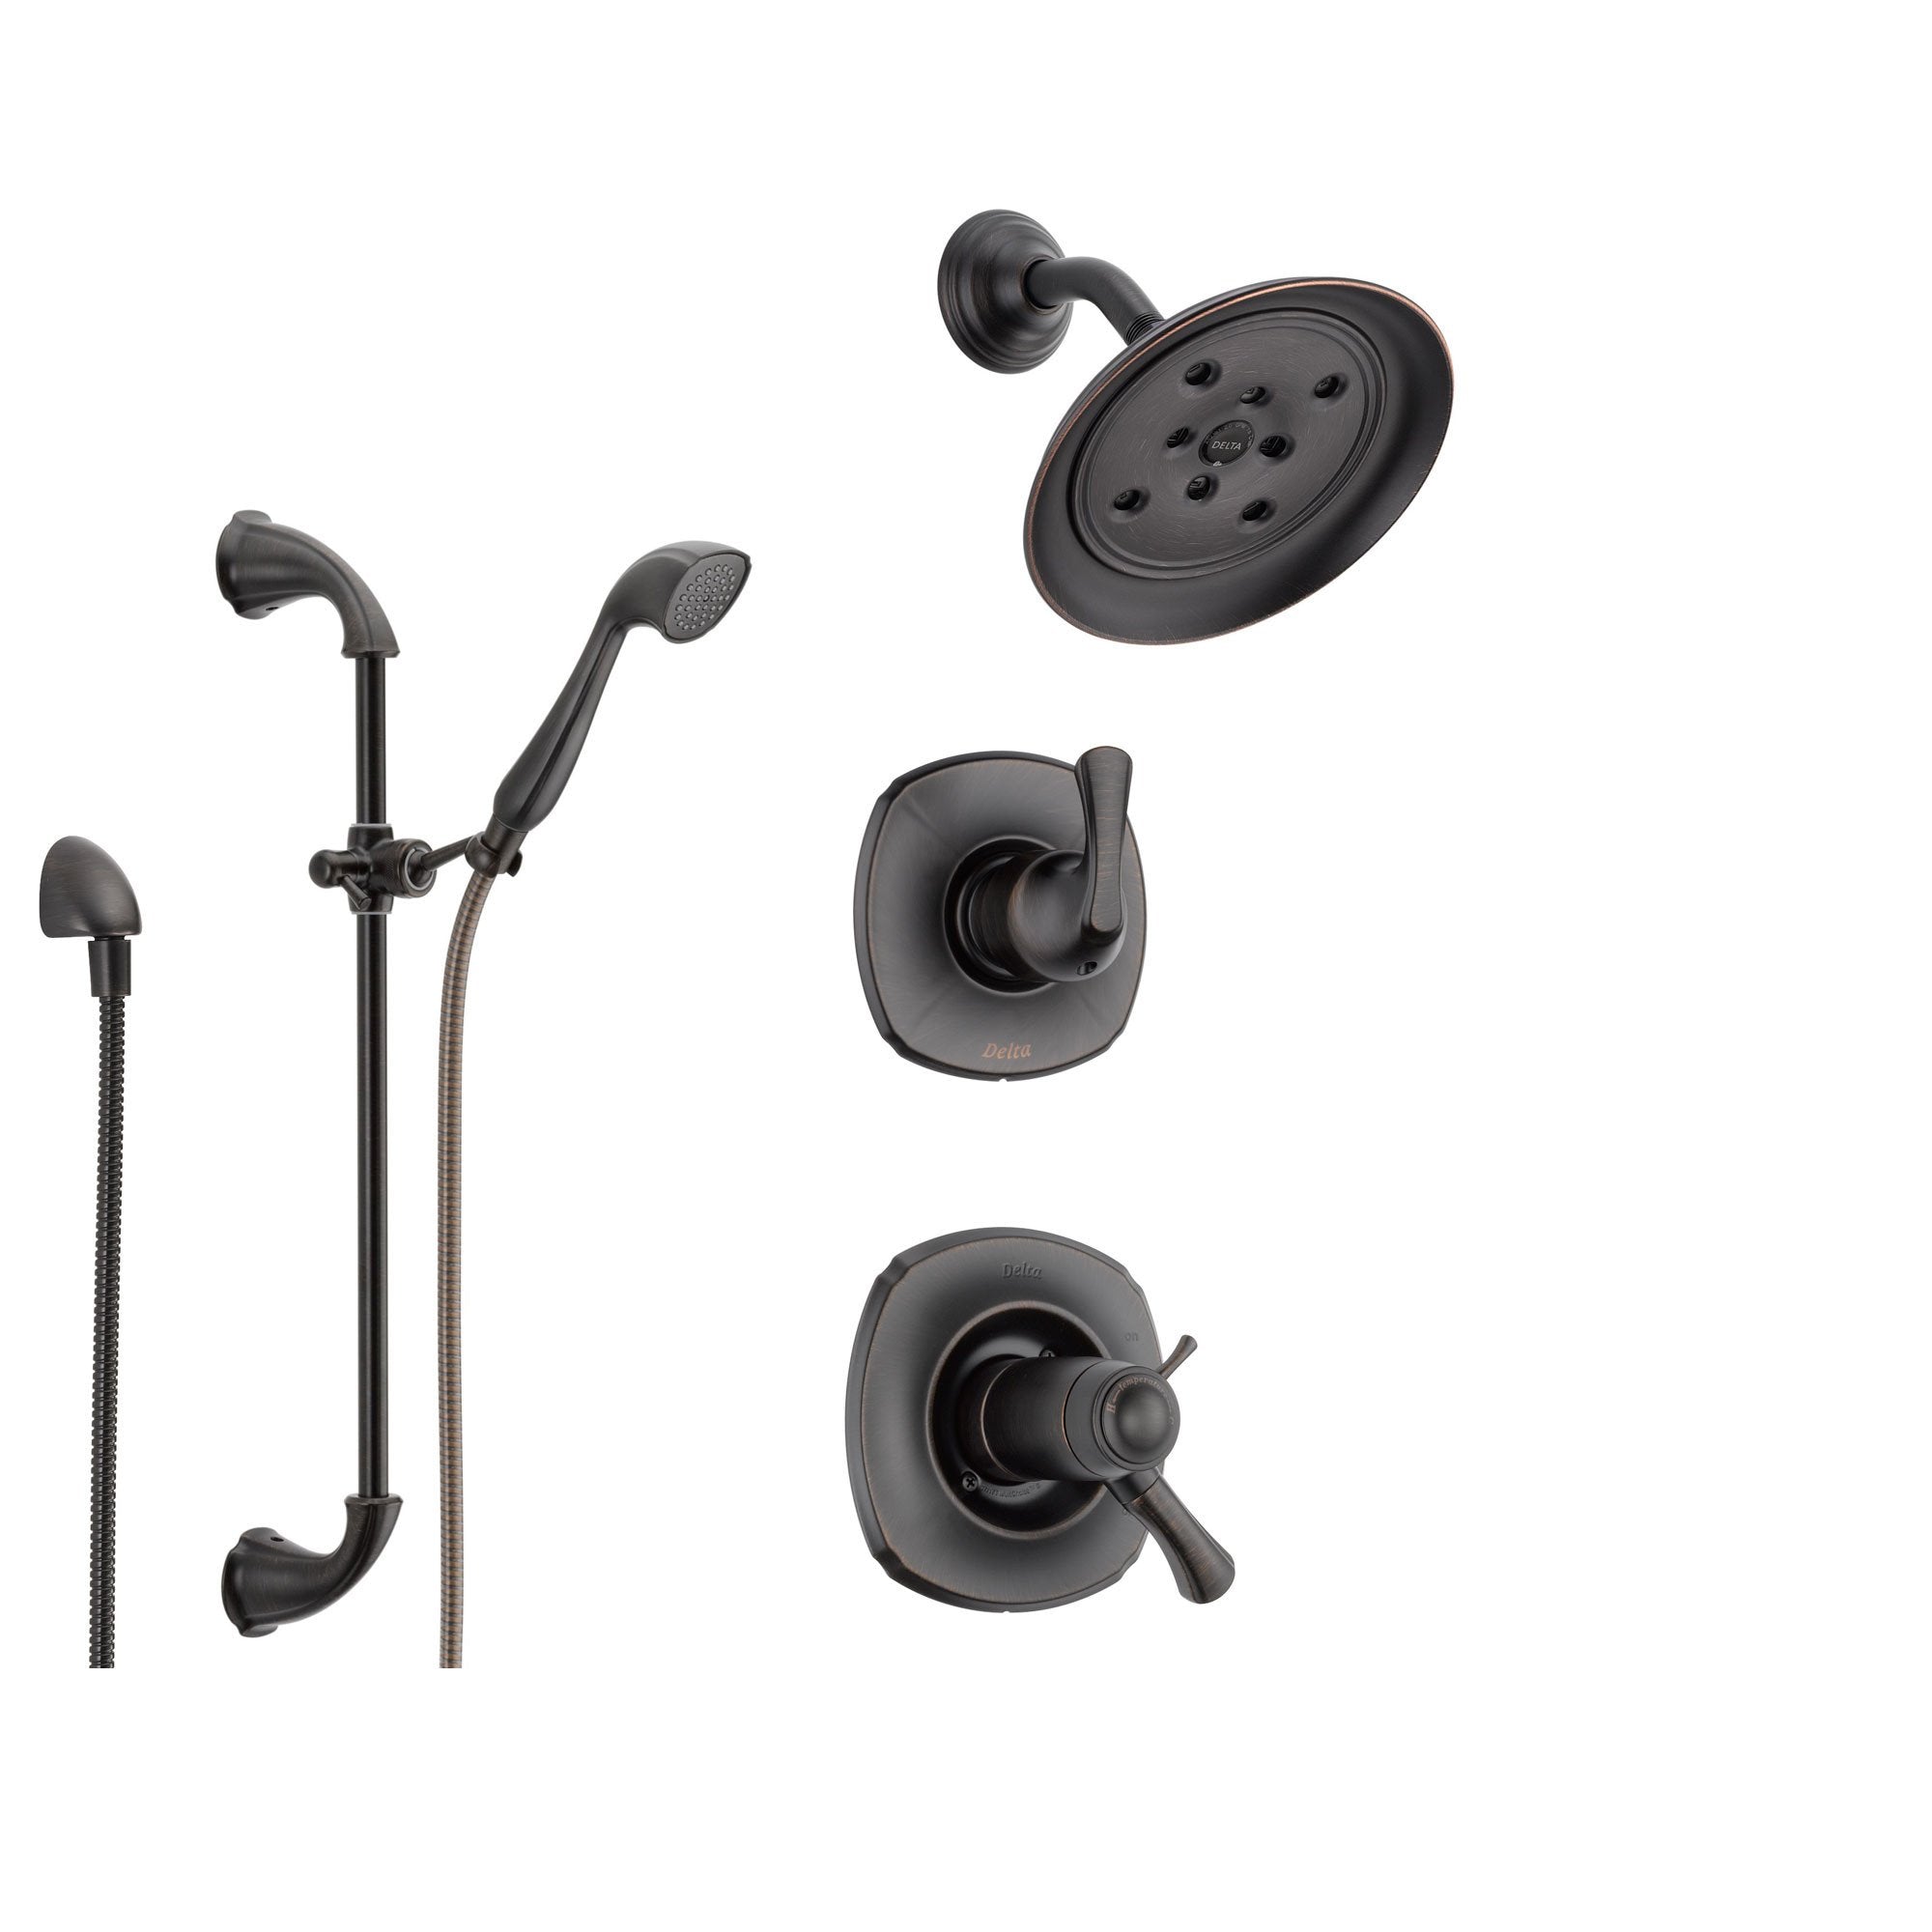 Delta Addison Venetian Bronze Shower System with Thermostatic Shower Handle, 3-setting Diverter, Showerhead, and Handheld Shower SS17T9283RB